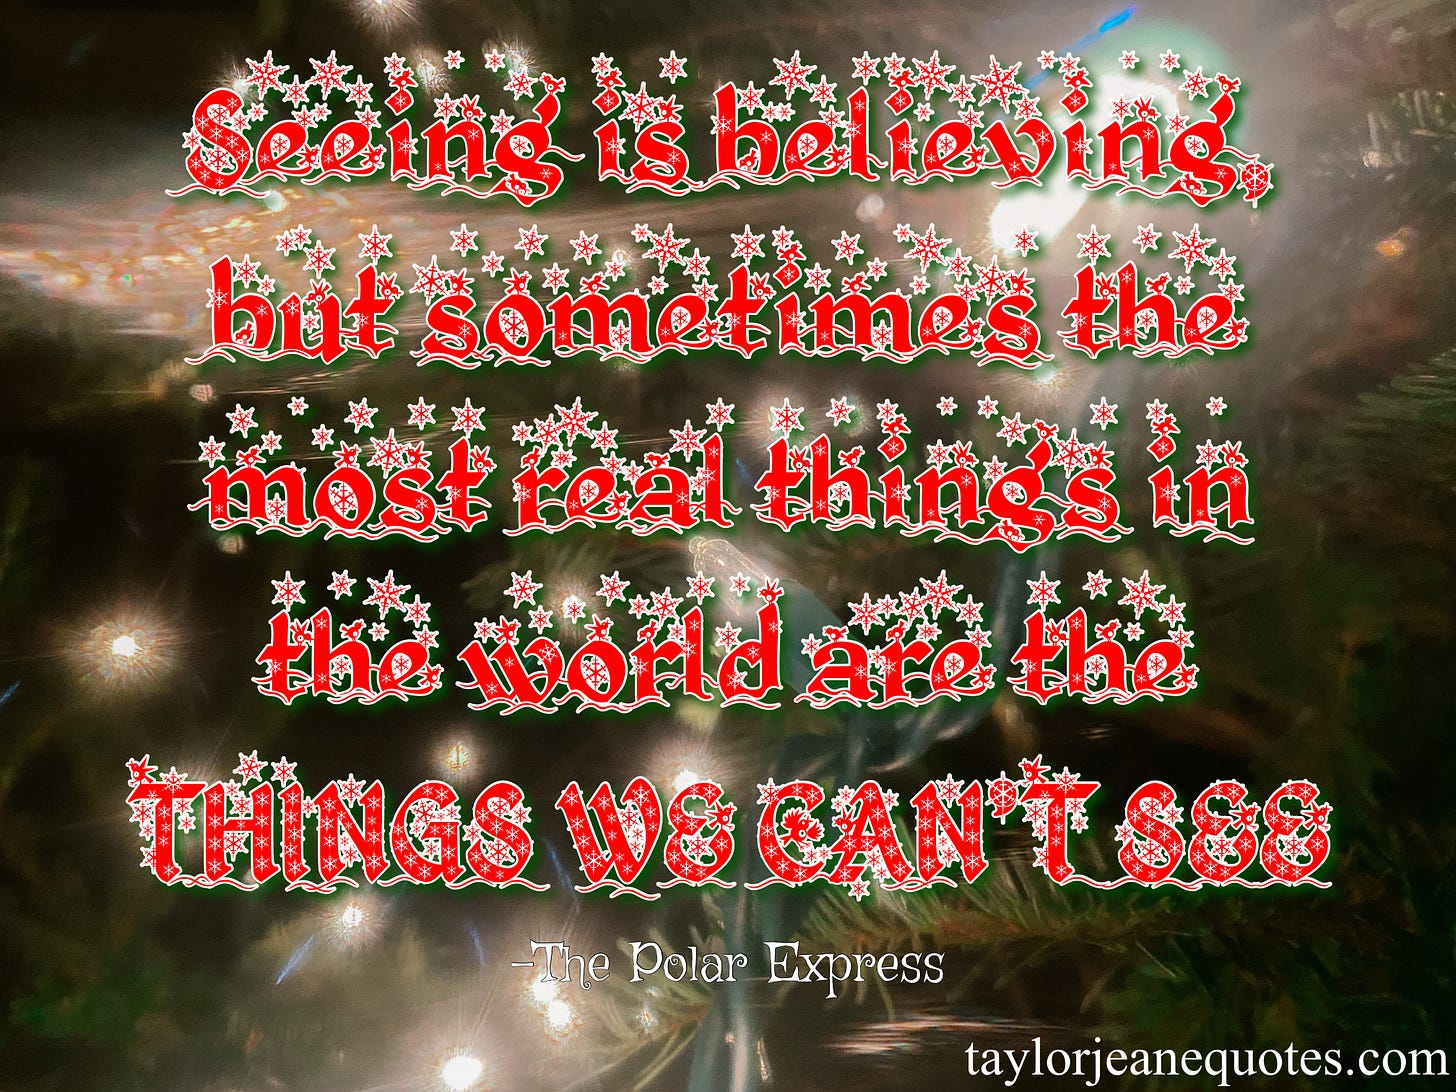 taylor jeane quotes, taylor jeane, taylor wilson, quote of the day, free quote of the day subscription, christmas quotes, holiday season quotes, december quotes, inspirational quotes, joyful quotes, giving quotes, gratitude quotes, happiness quotes, positive quotes, inspiring christmas quotes, inspirational holiday quotes, the polar express, the polar express quotes, the polar express believe quotes, christmas believe quotes